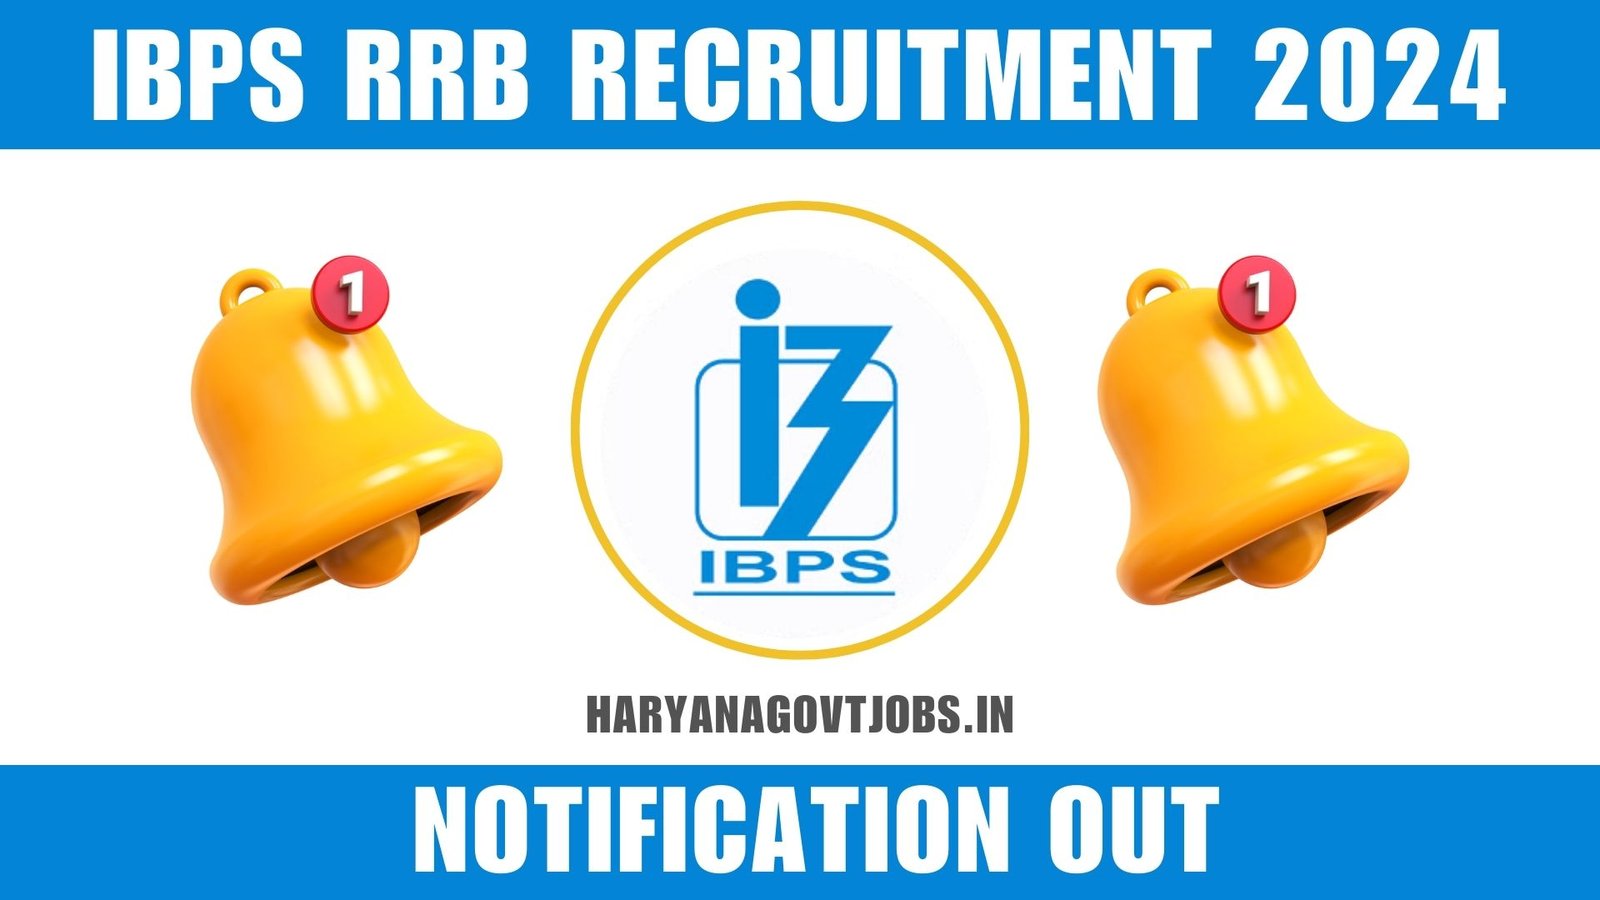 IBPS RRB Recruitment 2024 Overview